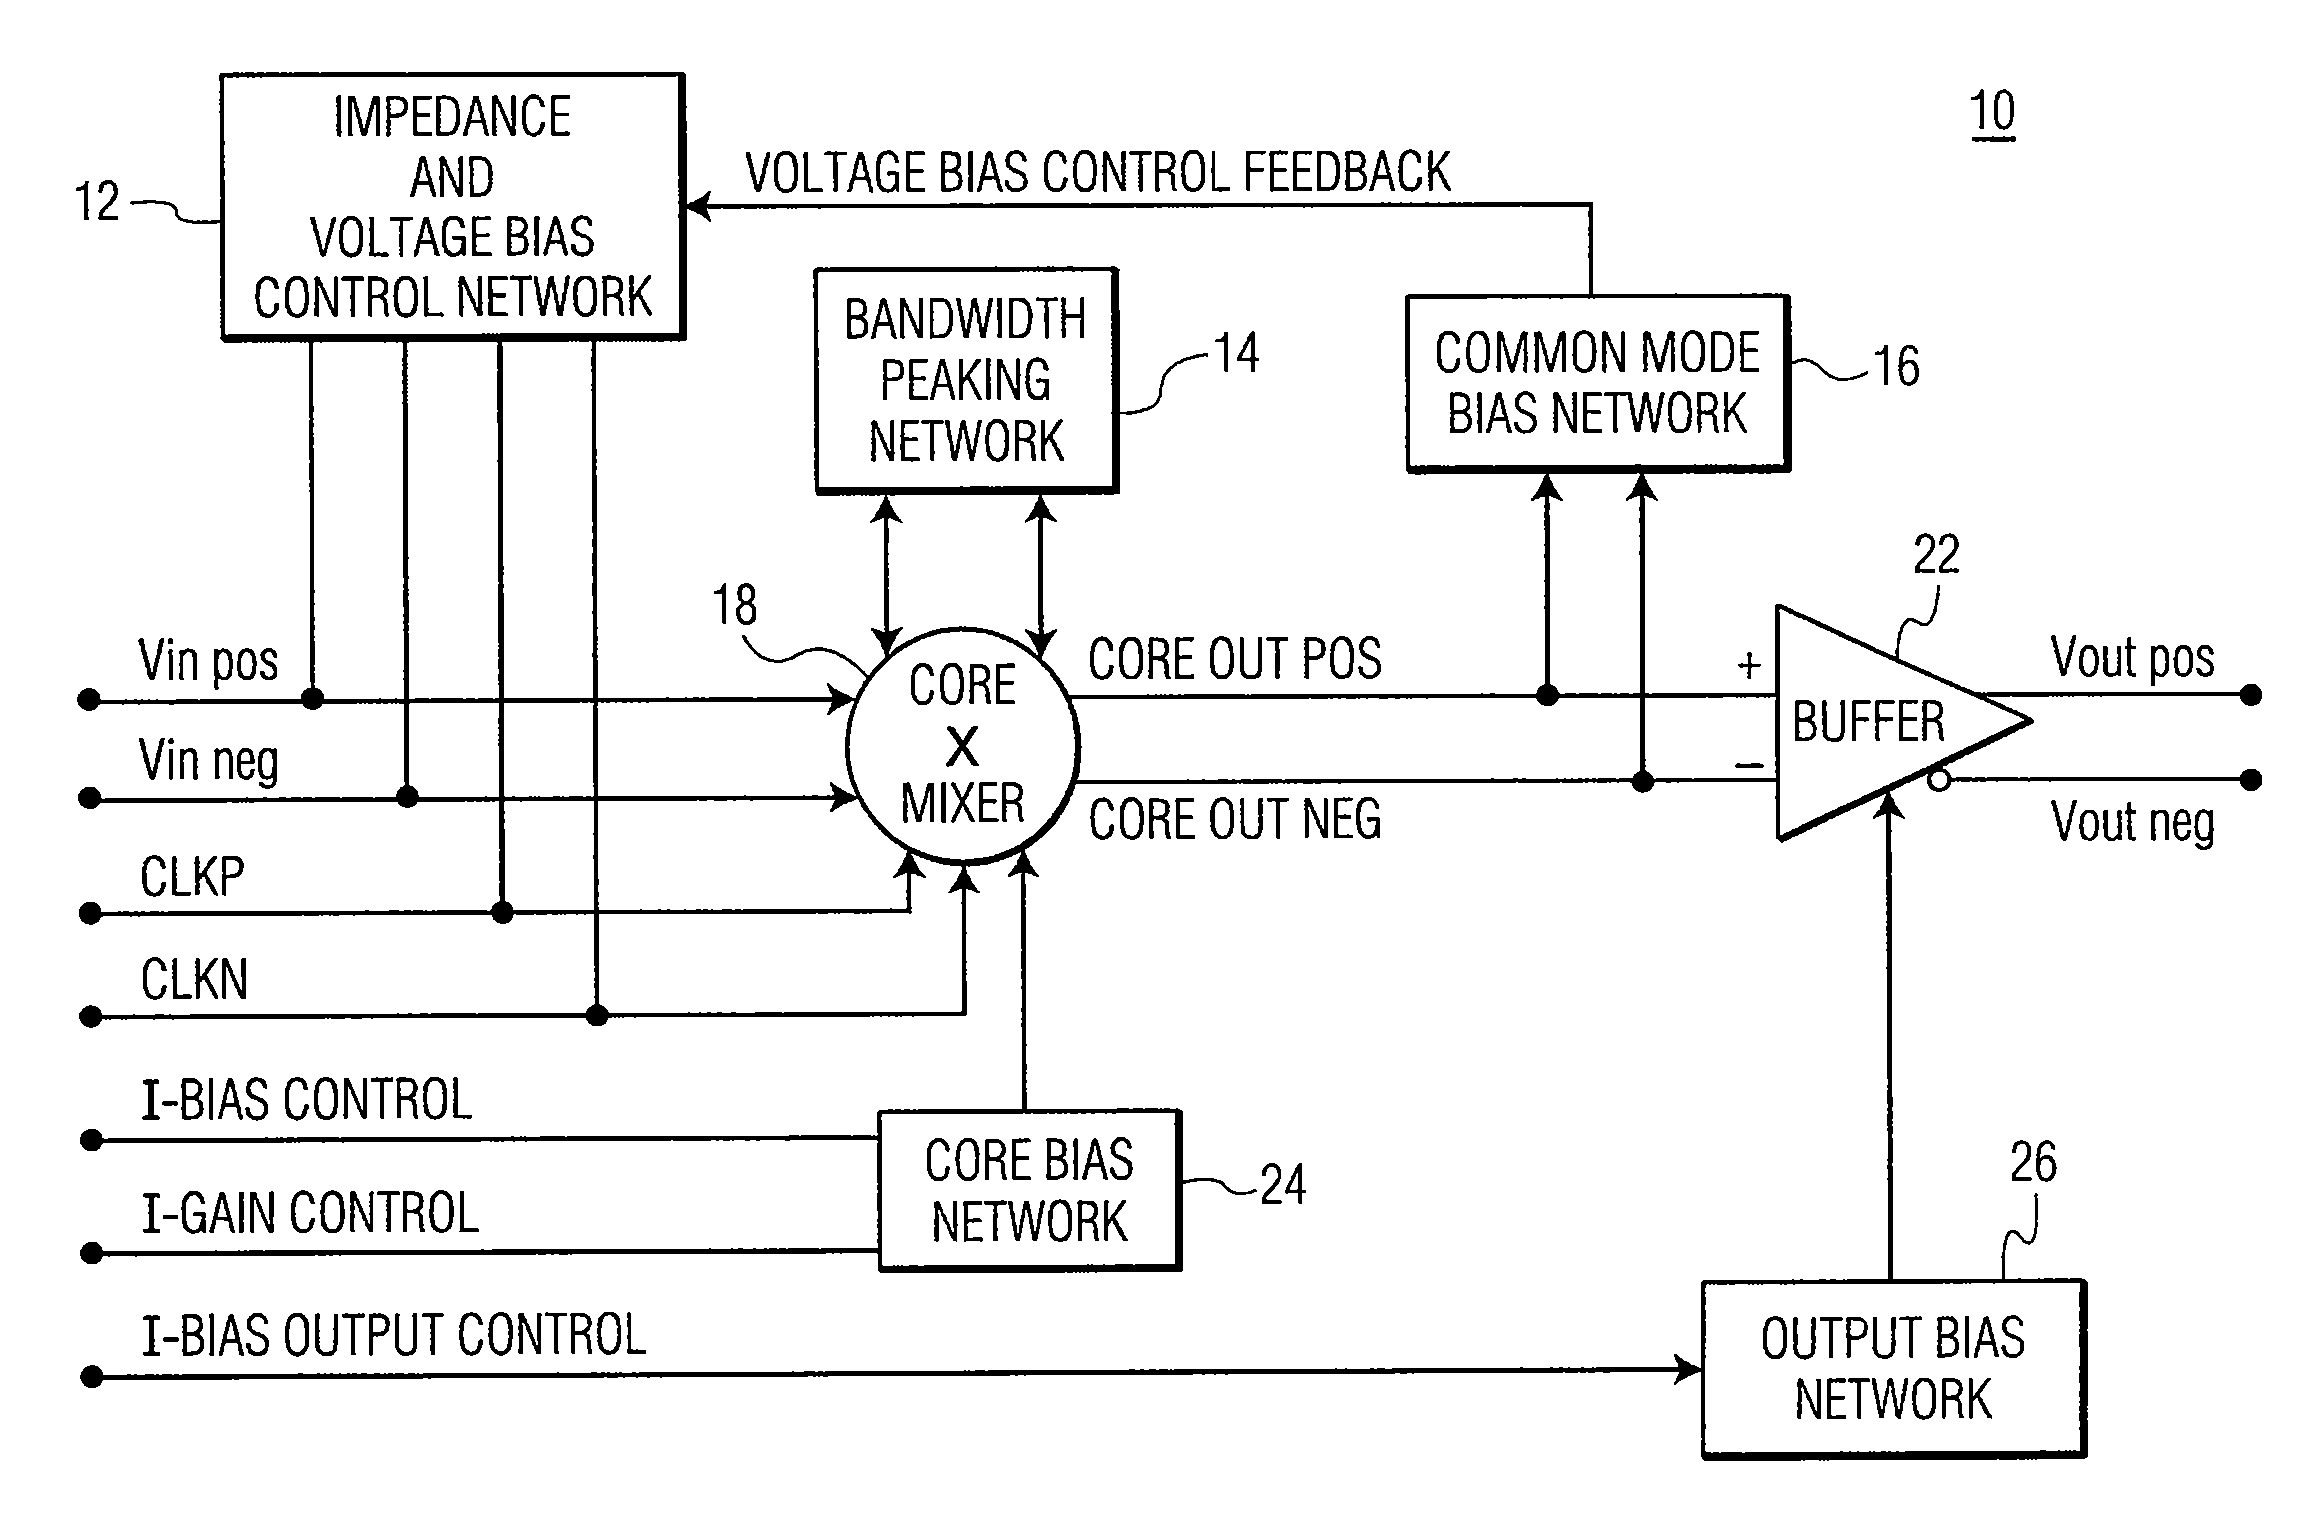 Ultra wide band, differential input/output, high frequency active mixer in an integrated circuit